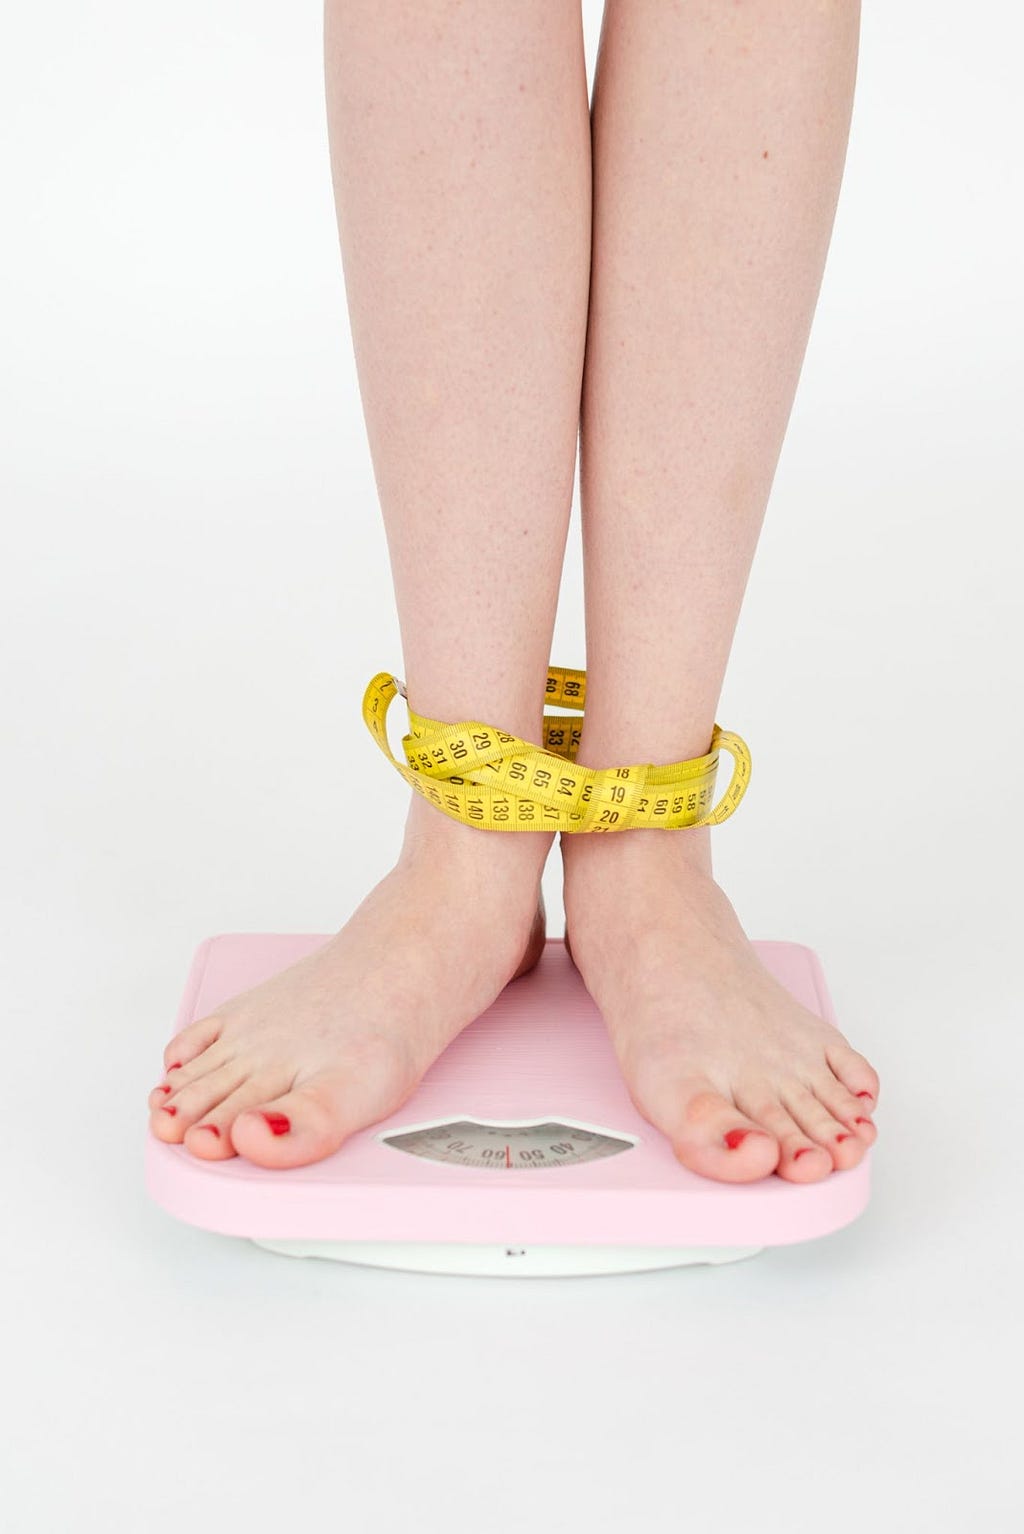 Image showing someone’s legs, standing on a weighing machine with an inch tape wrapped around their ankles.